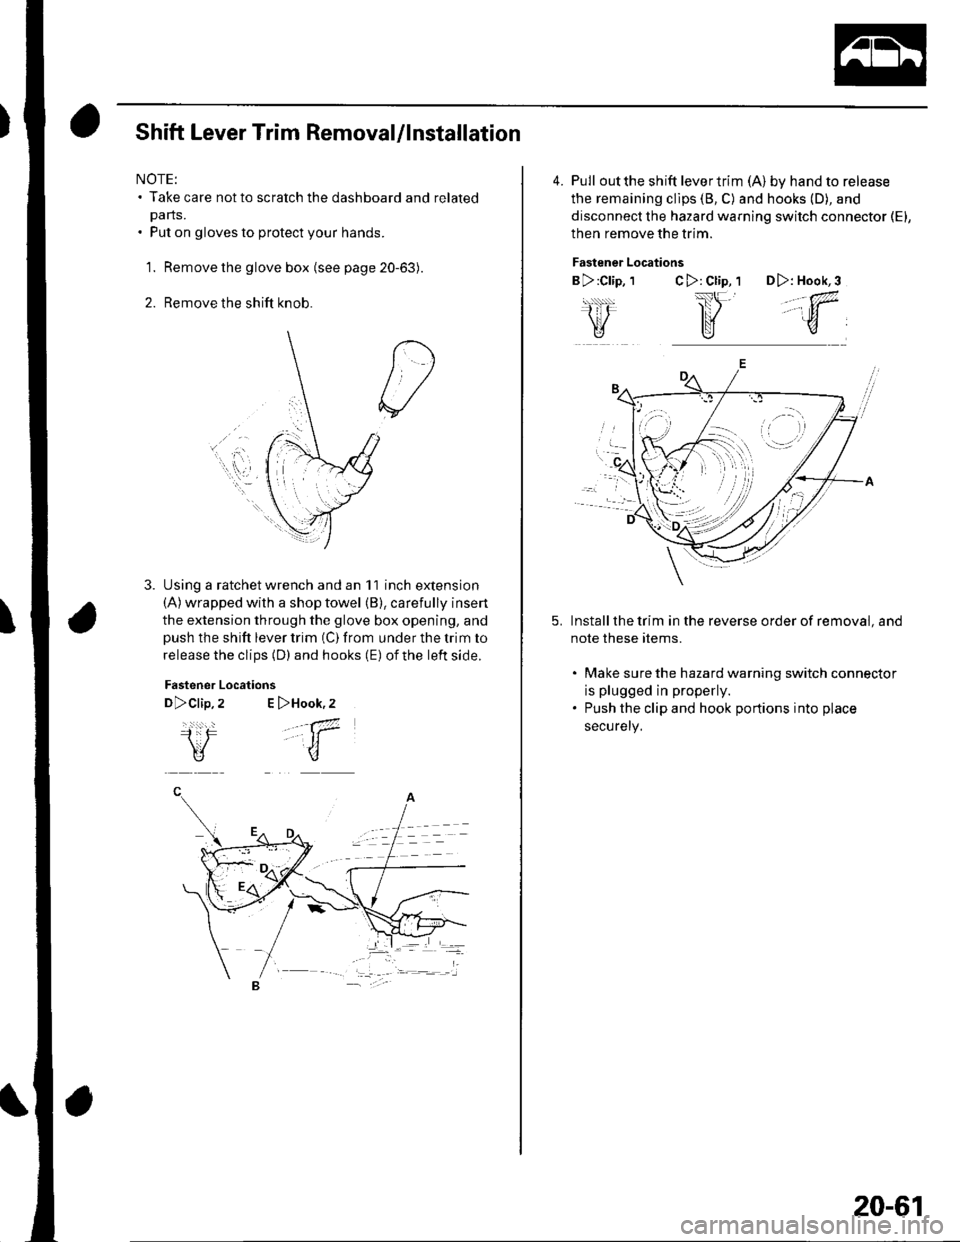 HONDA CIVIC 2003 7.G Workshop Manual Shift Lever Trim Removal/lnstallation
NOTE:. Take care not to scratch the dashboard and related
pa rts.. Put on gloves to protect your hands.
1. Remove the glove box (see page 20-63).
2. Remove the sh